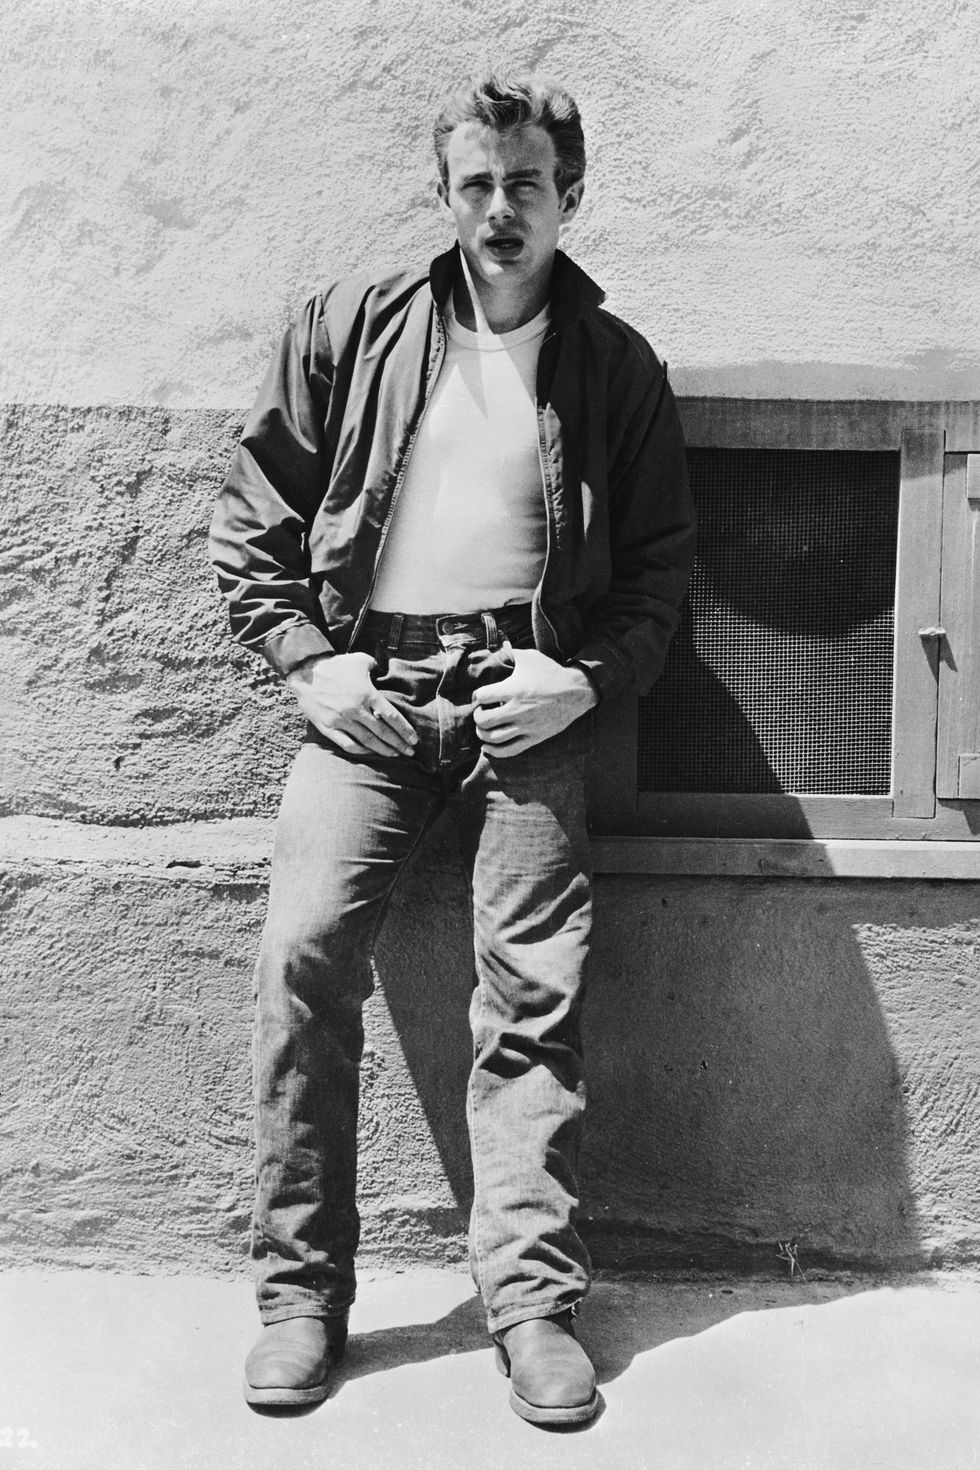 American actor James Dean (1931 - 1955) leans against a wall on the set of director Nicholas Ray's classic film, 'Rebel Without a Cause', 1955. (Photo via John Kobal Foundation/Hulton Archive/Getty Images)